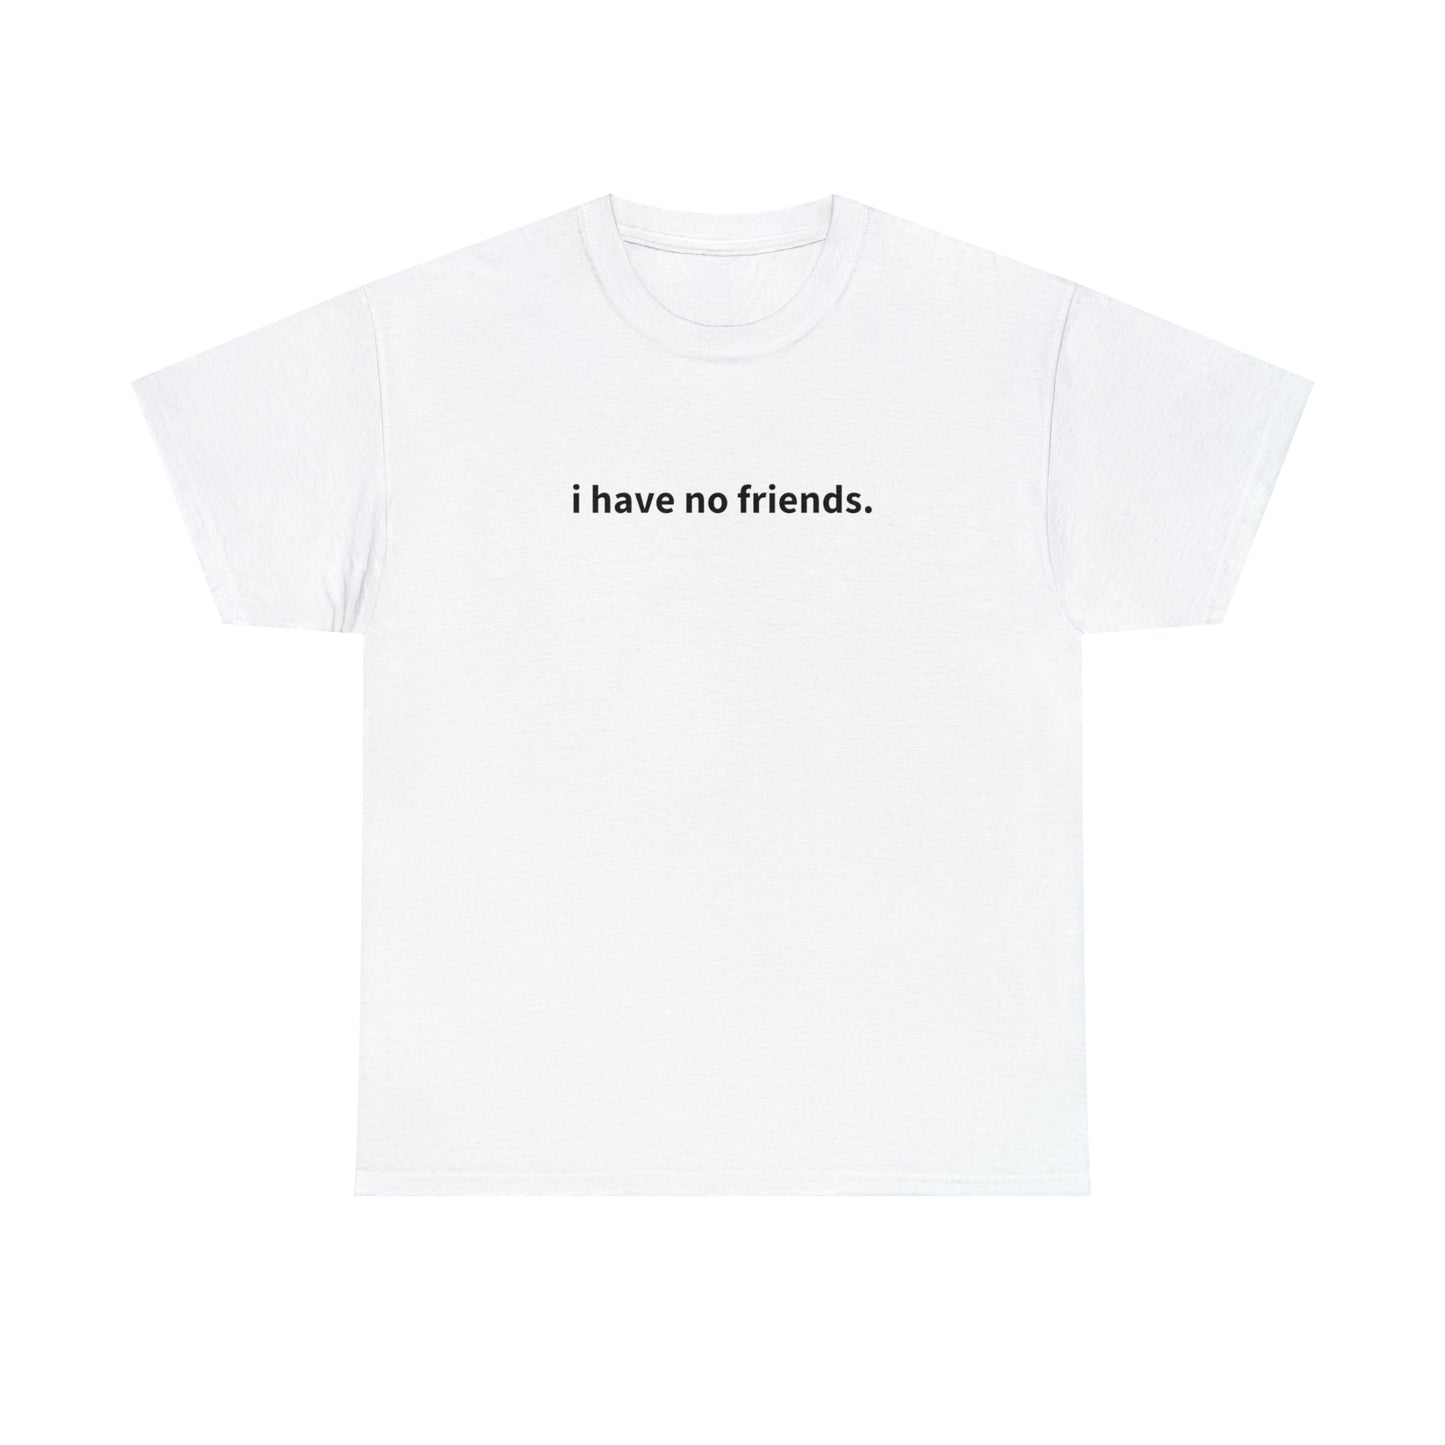 "i have no friends" T-Shirts!